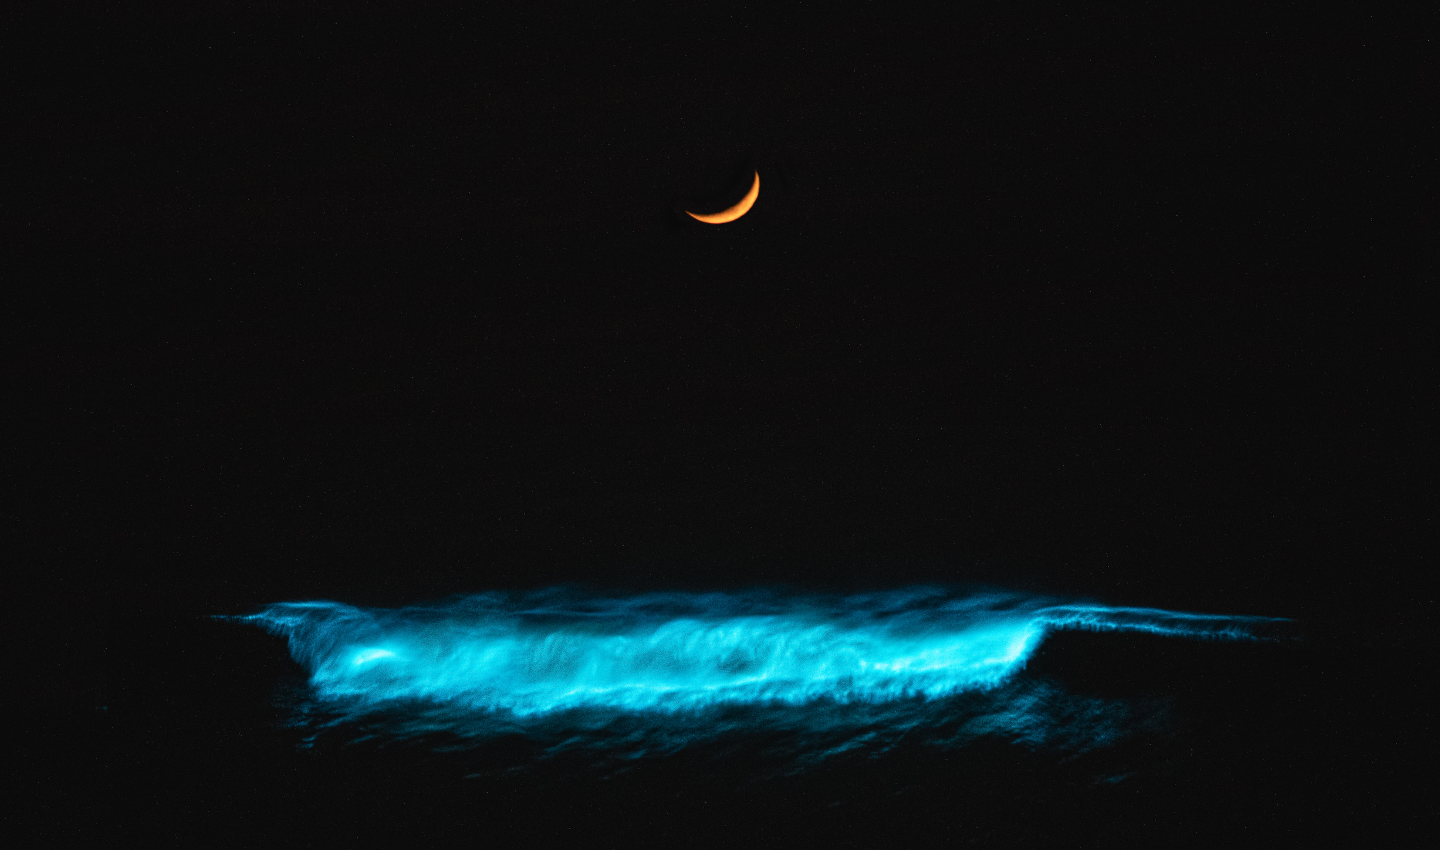 Interesting animals that use bioluminescence in the deep Ocean.  